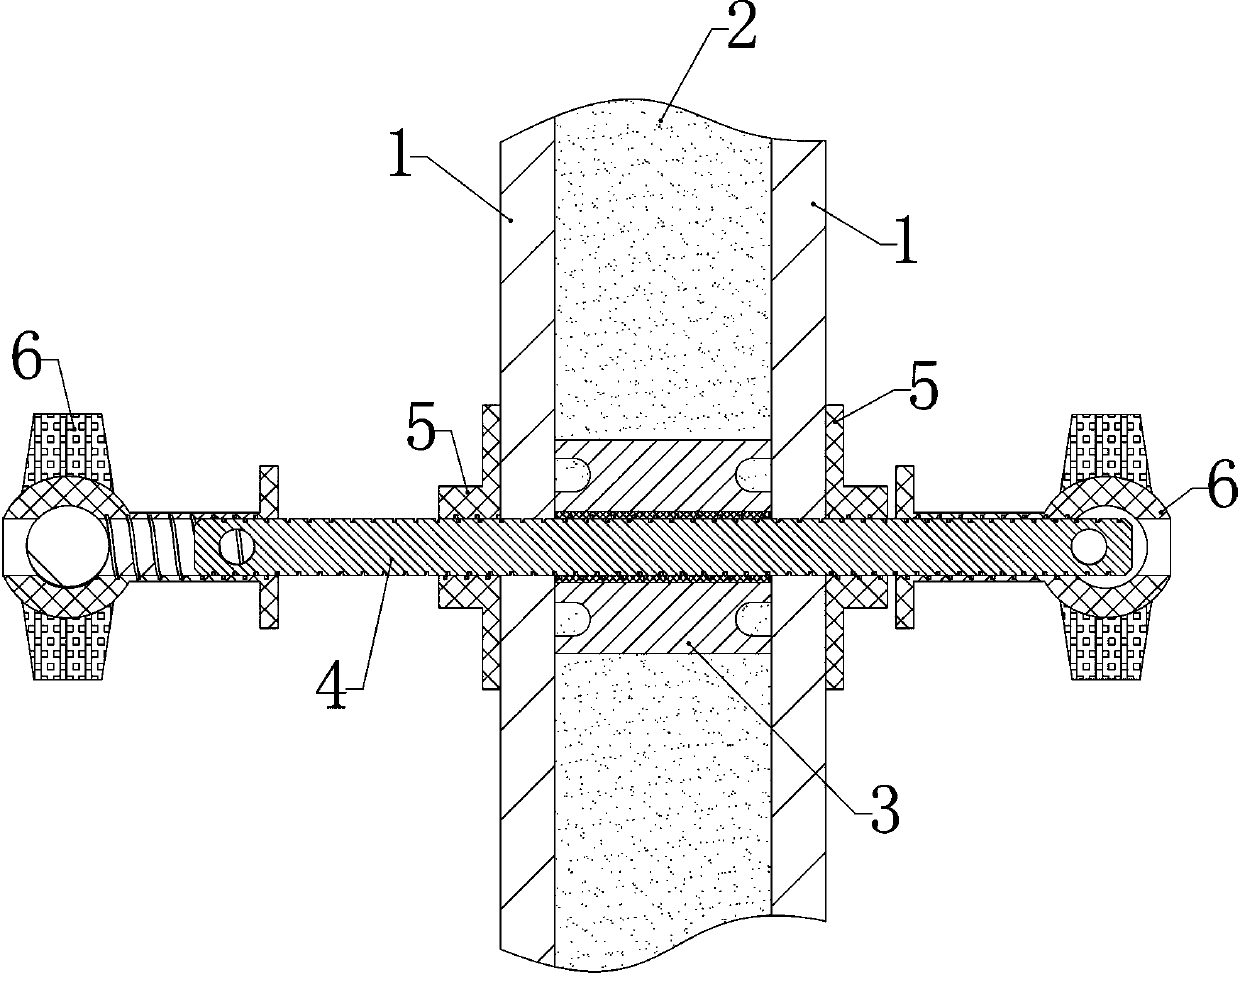 Prefabricated building connection assembly